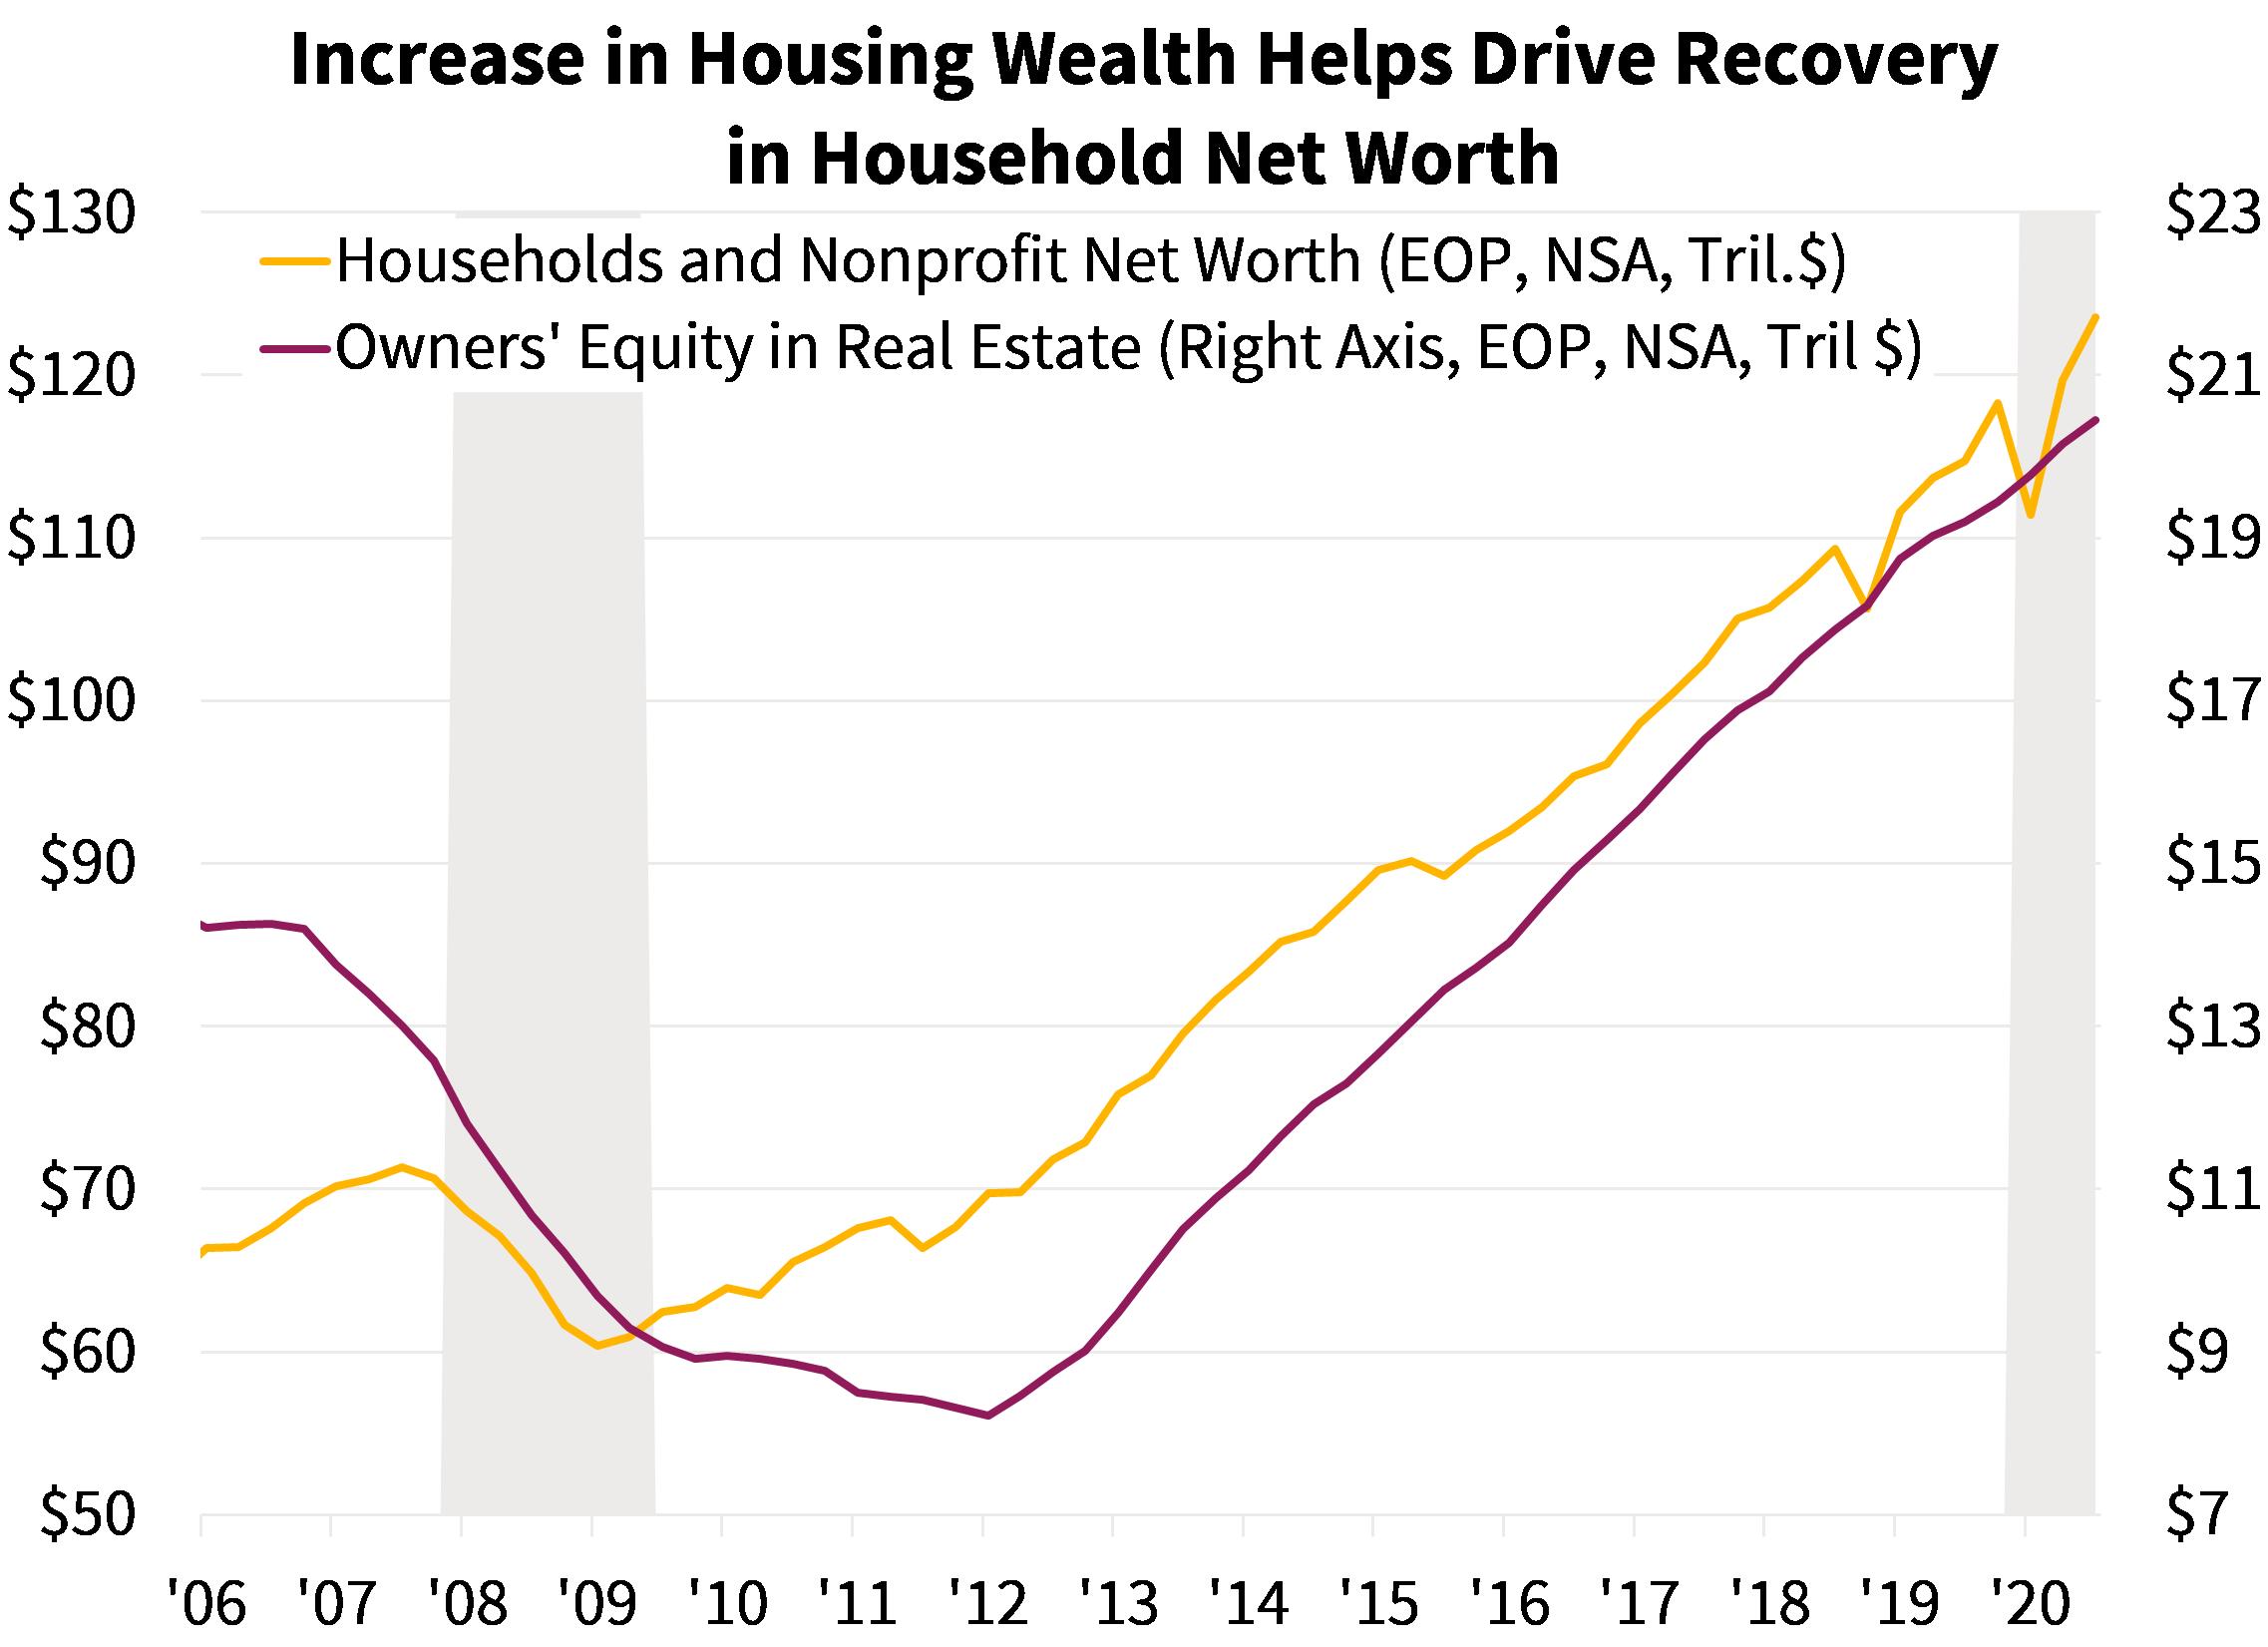  Increase in Housing Wealth Helps Drive Recovery in Household Net Worth
